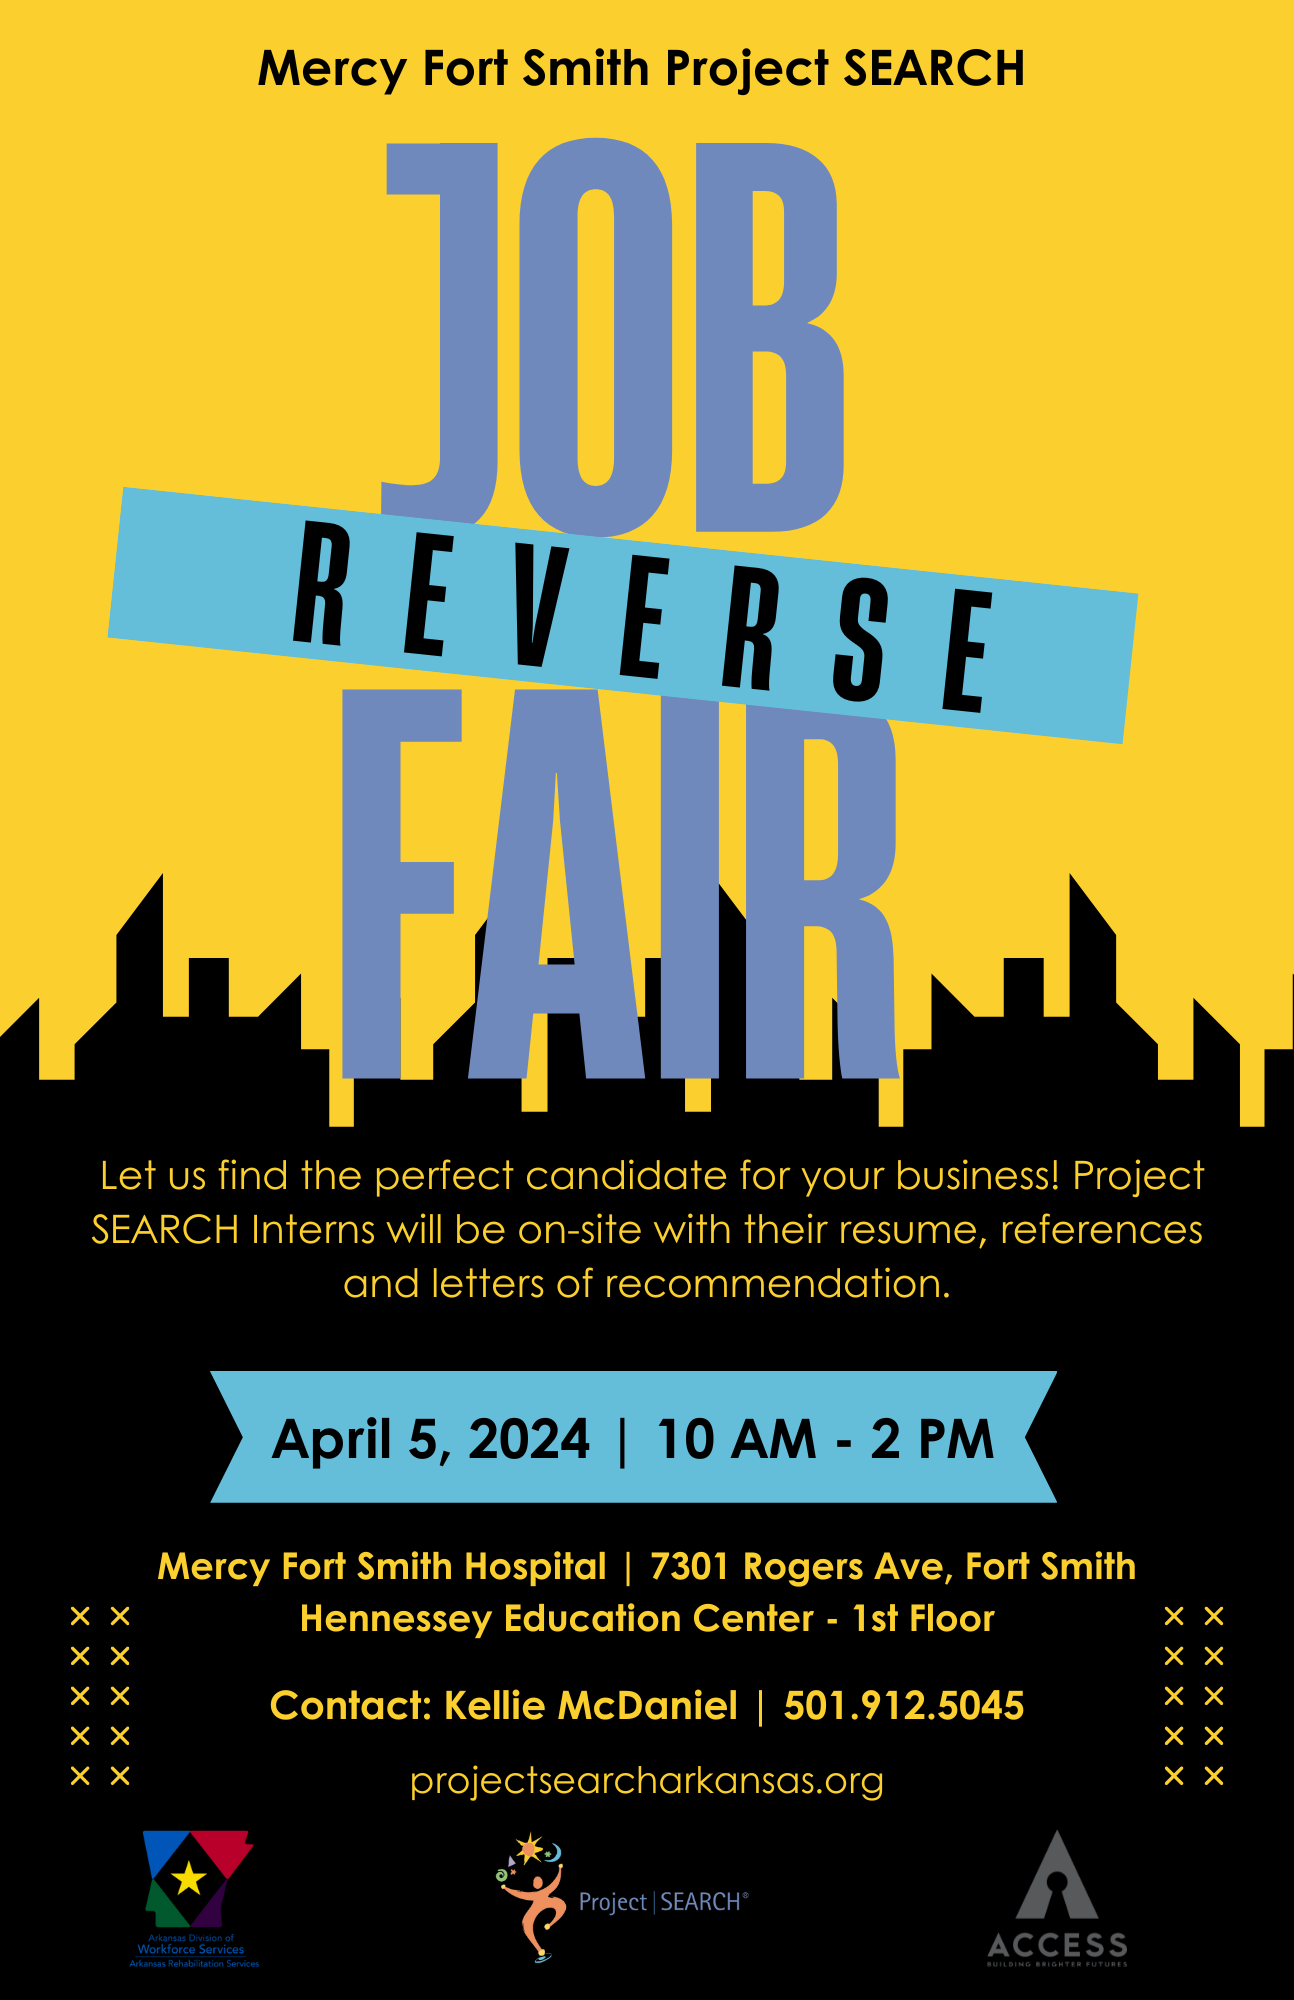 Mercy to Host Reverse Job Fair for Individuals with Disabilities